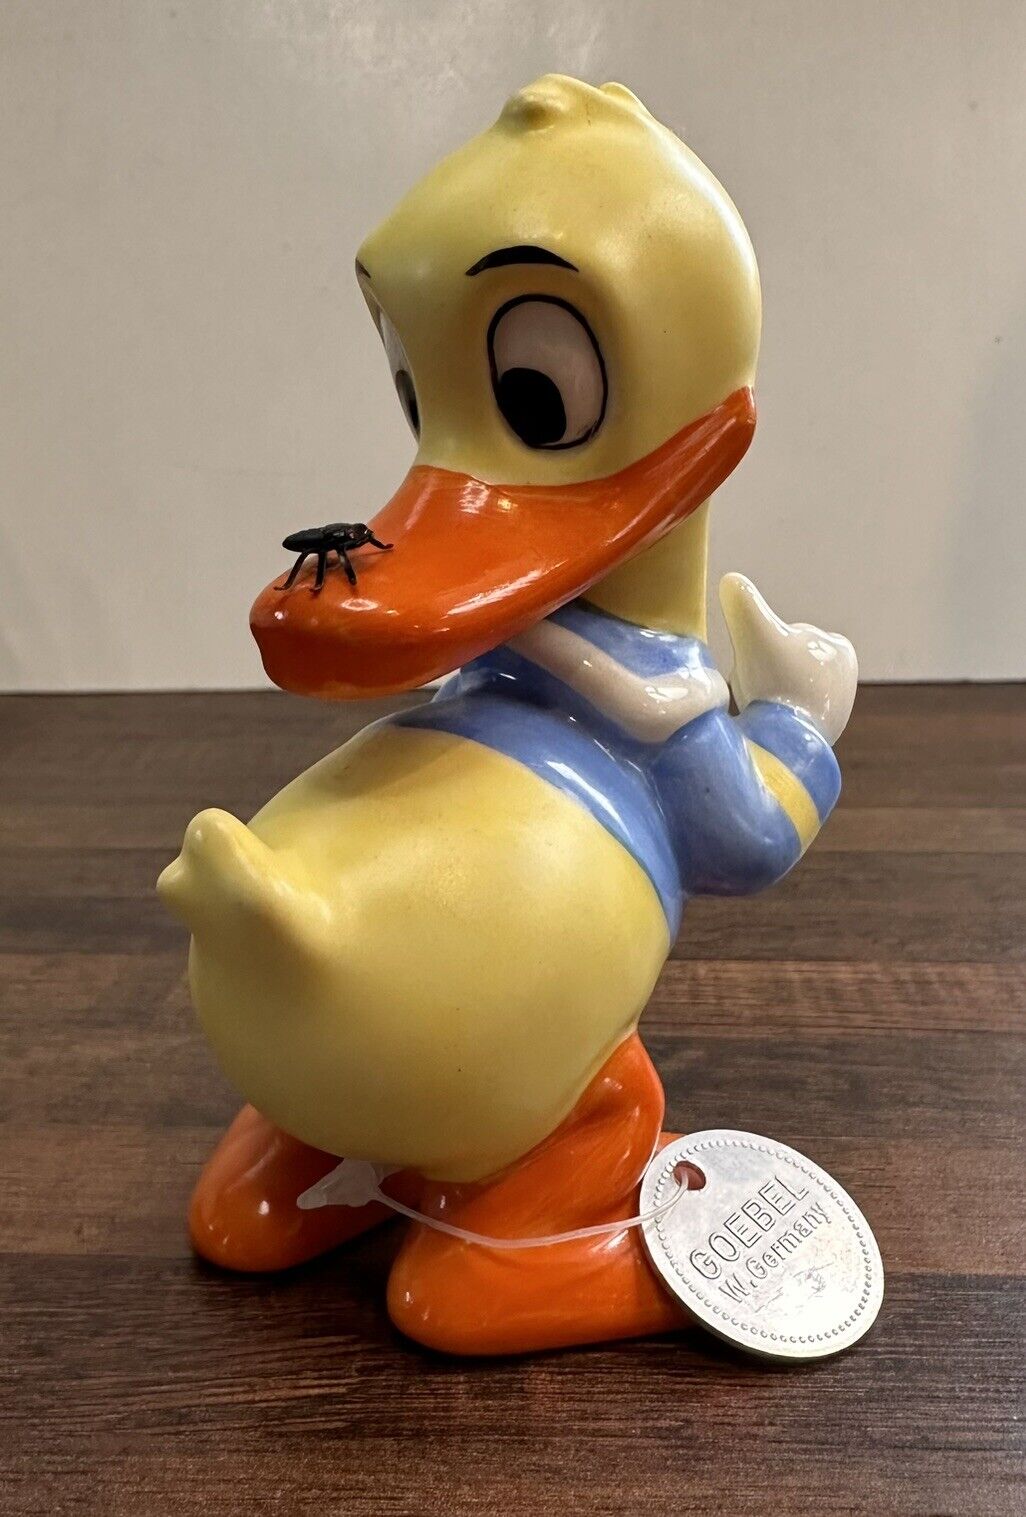 Goebel Disney Donald Duck figurine with tag Archive Collection Bug